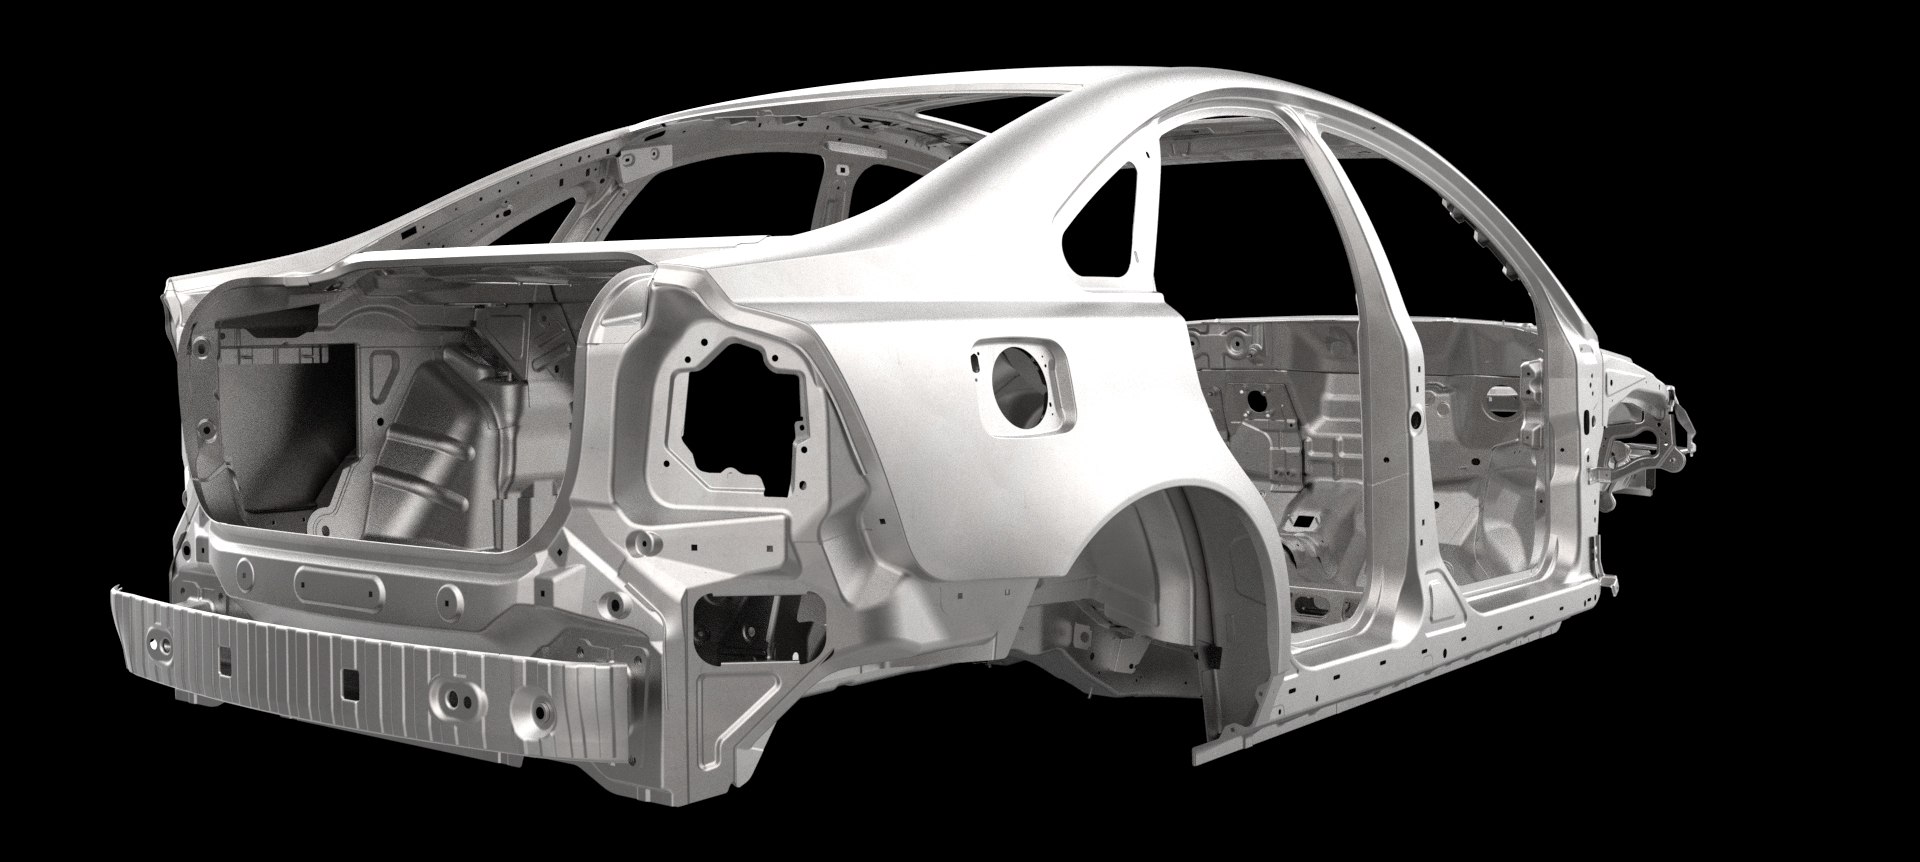 3D SACN MODEL Volvo S6 Frame and Chassis 3D model - TurboSquid 2012696